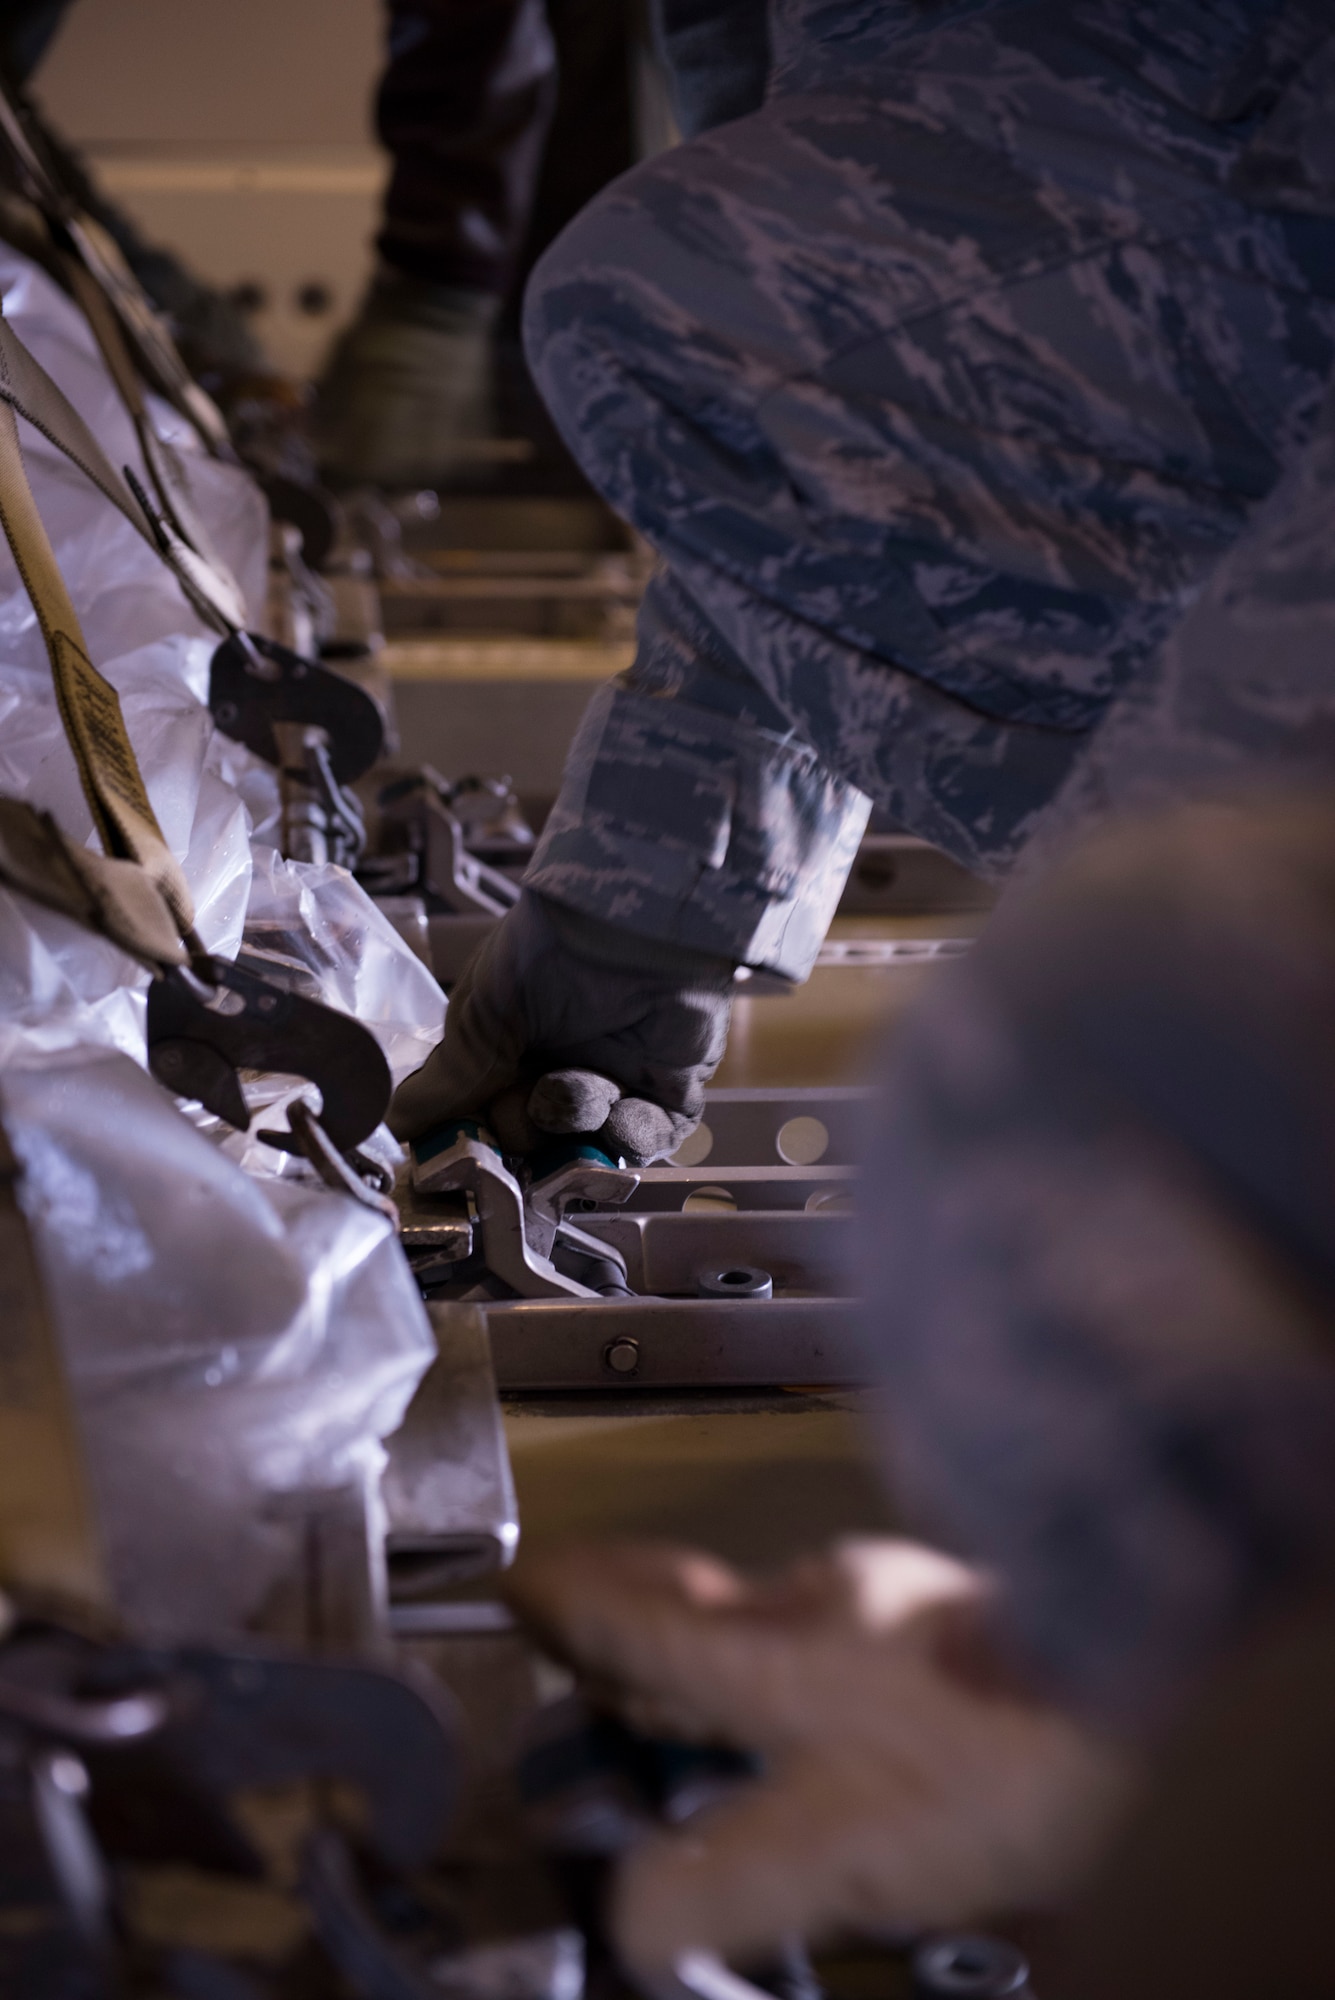 Airmen from the 366th Logistics Readiness Squadron secure latches on cargo in a KC-10 Extender from Travis Air Force Base, California, Jan. 23, 2016 at Mountain Home AFB, Idaho. The cargo will be delivered to Tyndall AFB, Florida, for Combat Archer and Combat Hammer. The exercise is designed to test each participating units’ Weapon System Evaluation Program, determine reliability, evaluate capability and limitations, identify deficiencies, recommend corrective action and maintain combat readiness. (U.S. Air Force photo by Senior Airman Lauren-Taylor Levin/RELEASED)